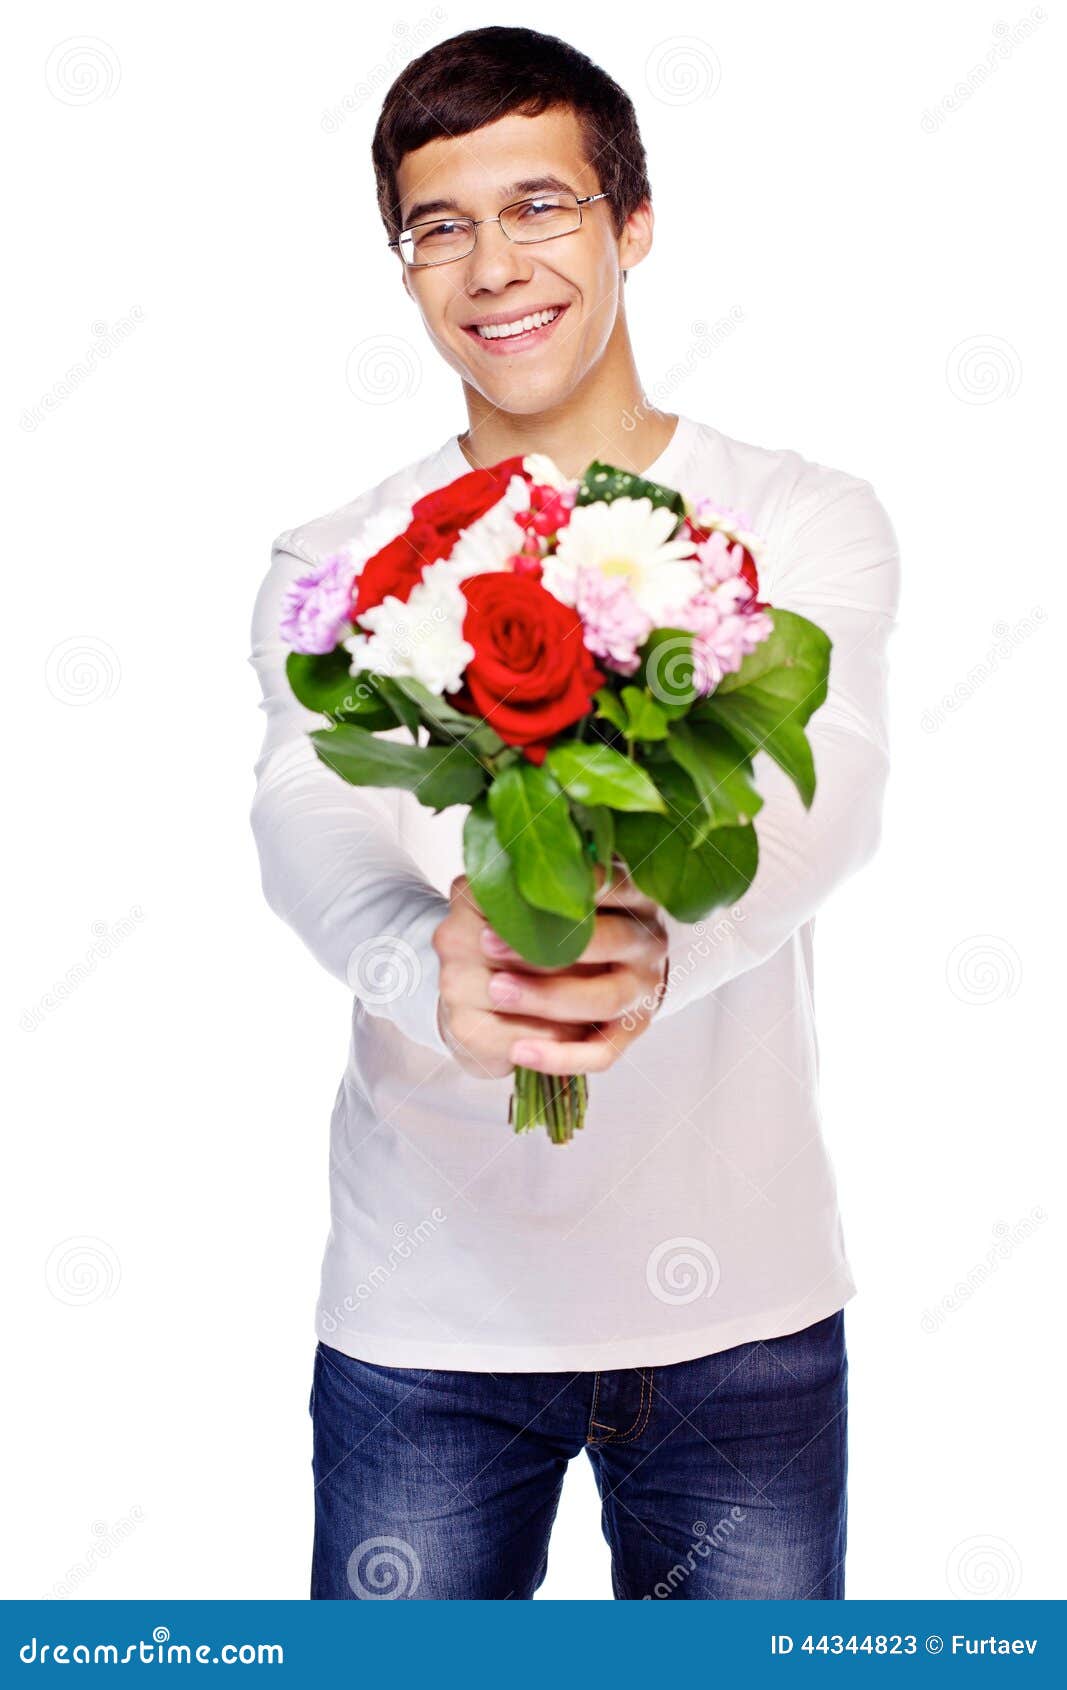 Guy with flowers stock image. Image of holding, present - 44344823